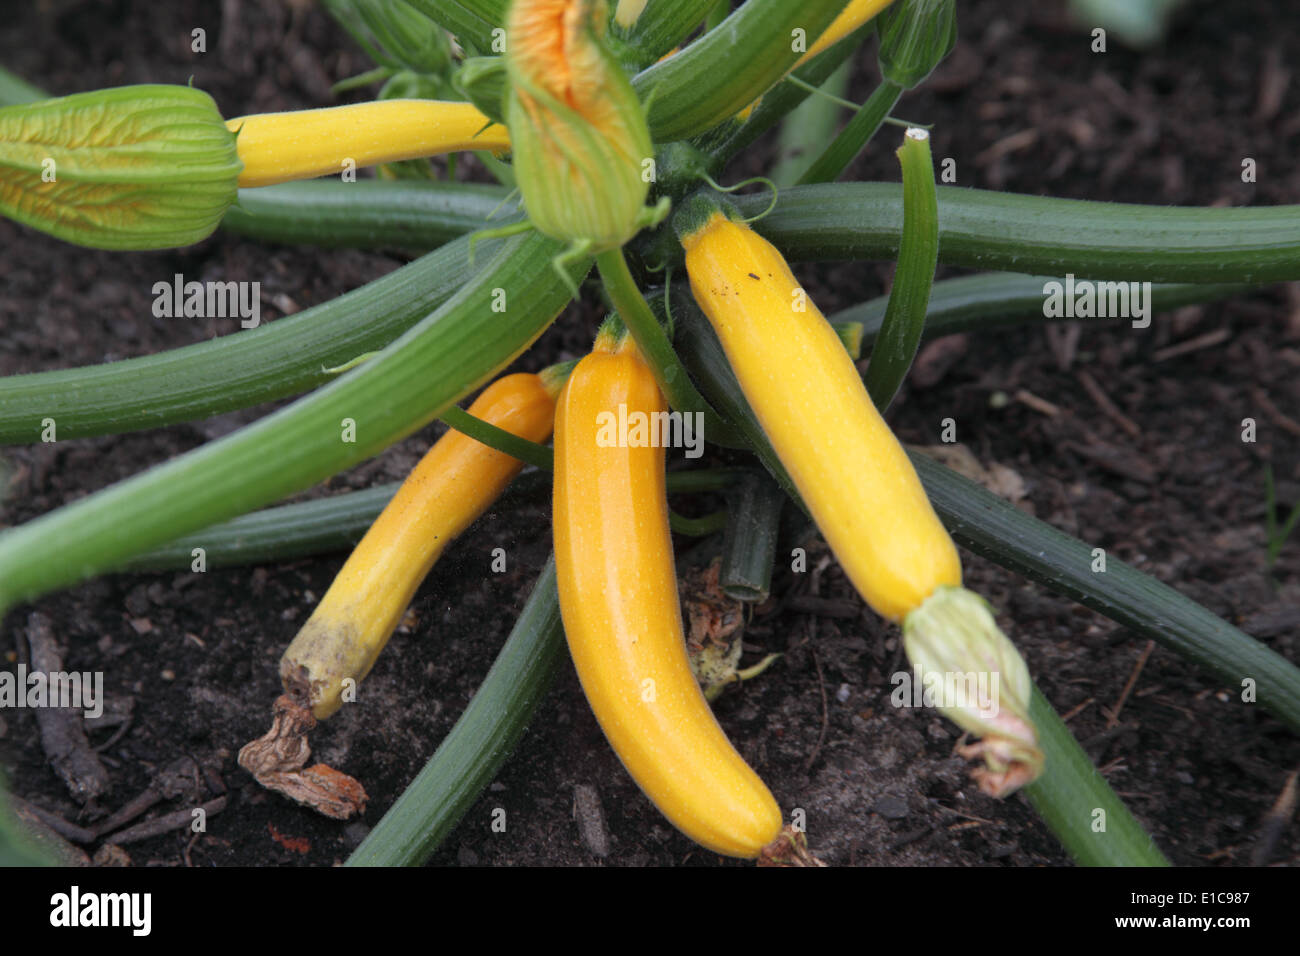 Courgette 'Parador' close up of ripe fruit Stock Photo